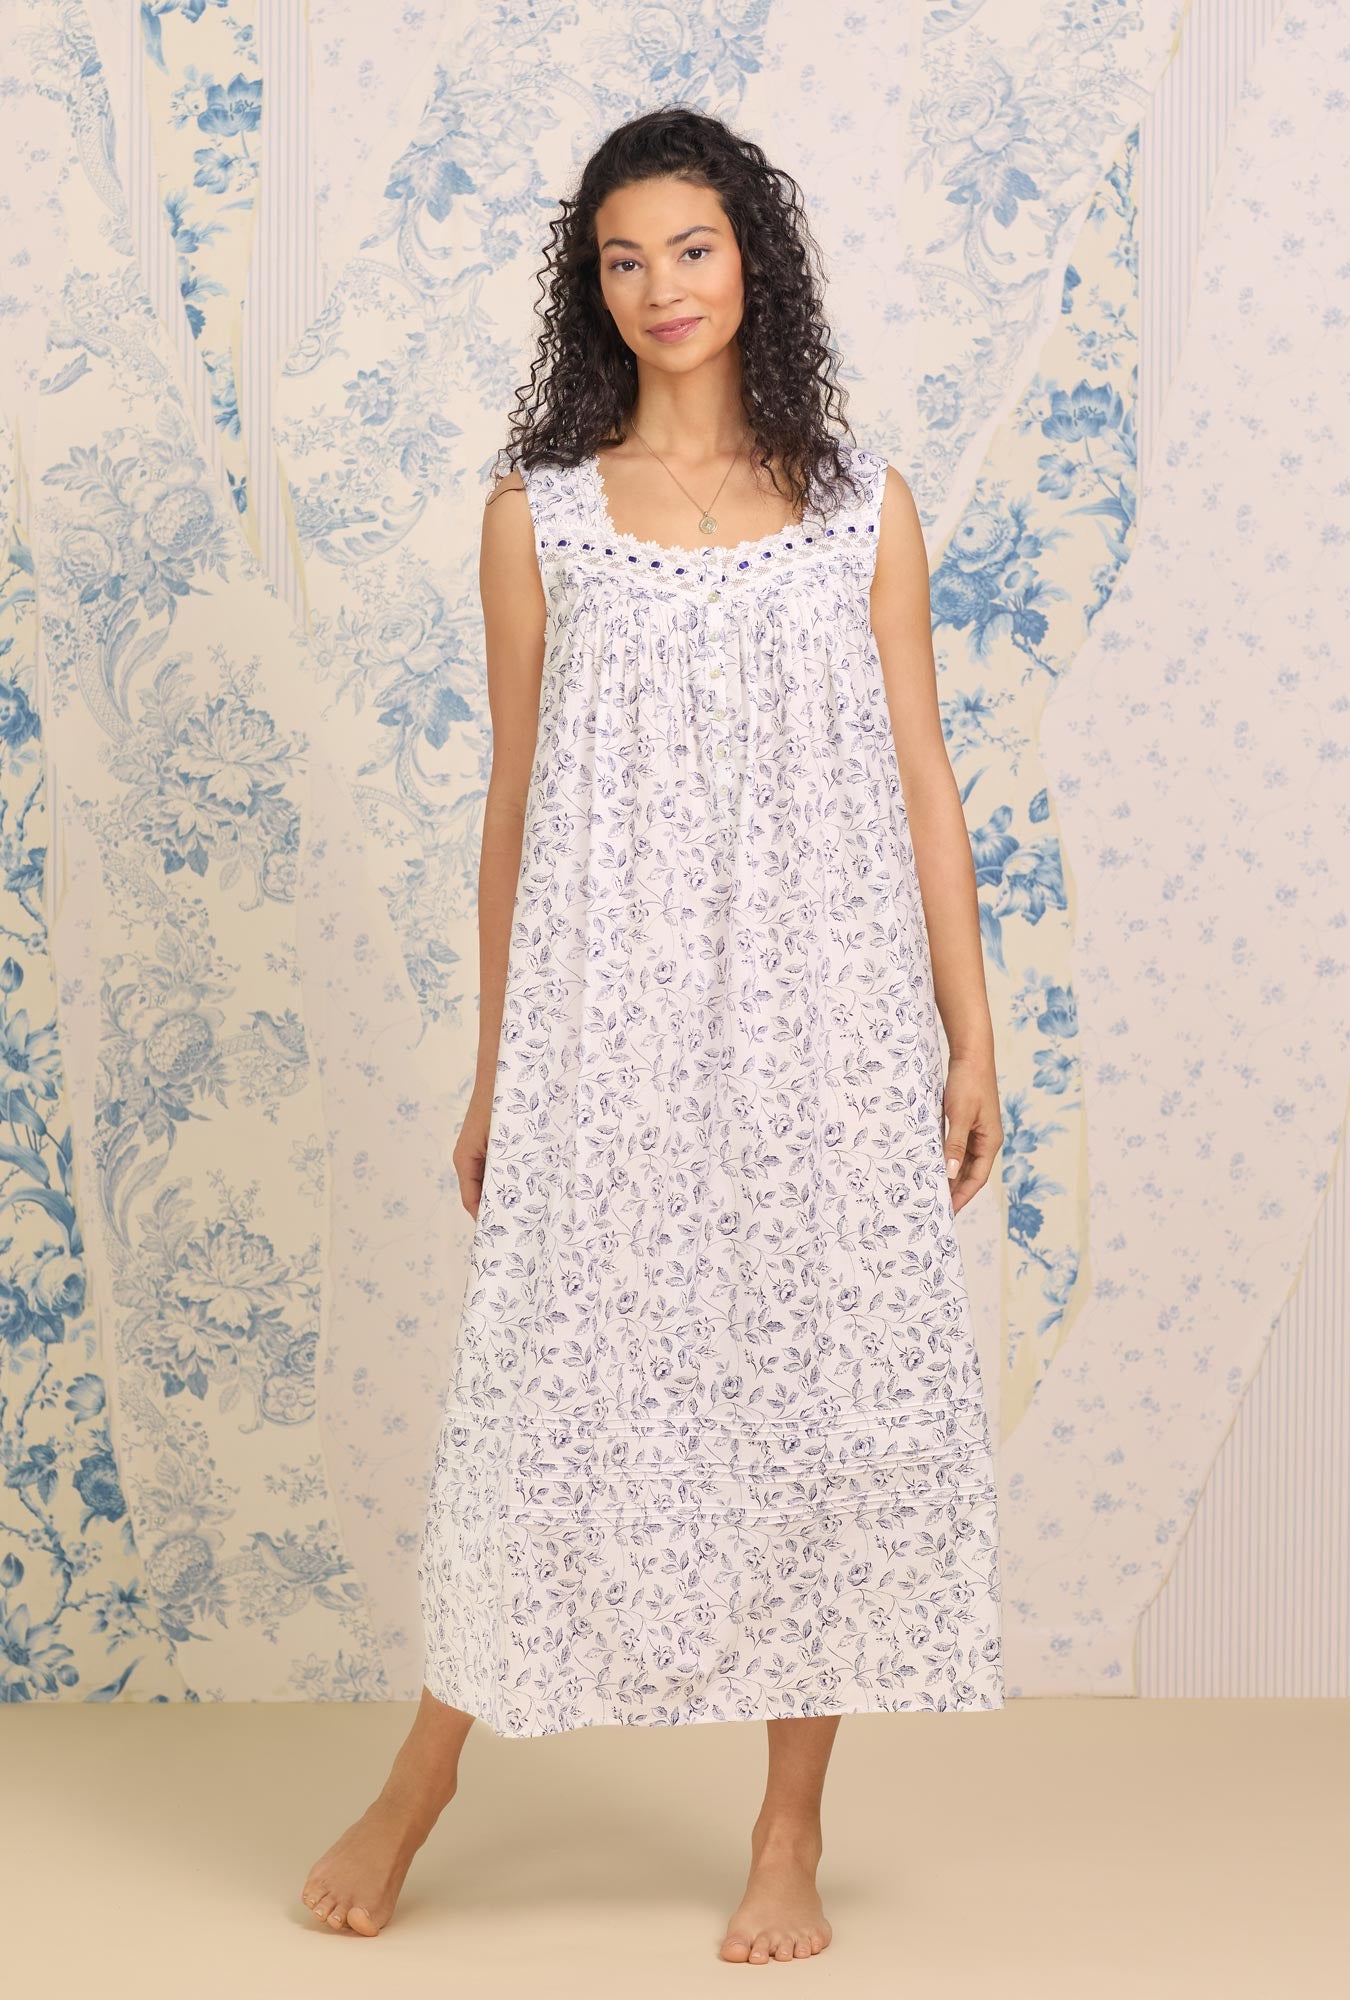 A lady wearing white sleeveless "Eileen" Cotton Nightgown with Marine Rose Floral print